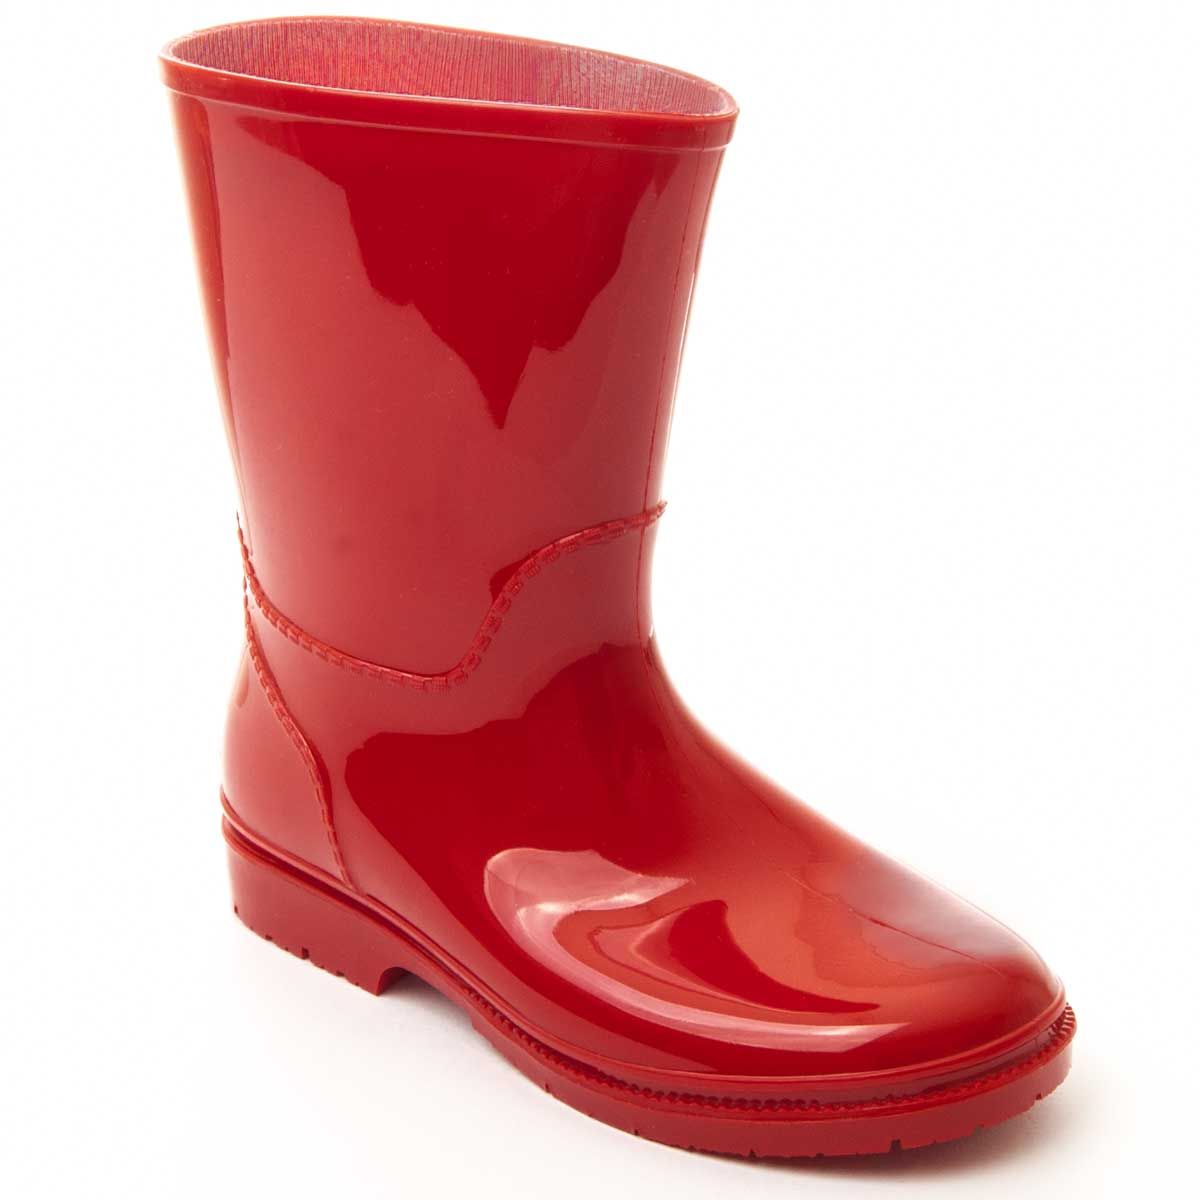 Capsula by Kelara collection. Average cane water boot with measures: 17cm * 13cm. Perfect for rainy days as it keeps the feet warm and dry. Both sole and outer lining are one piece so that water does not penetrate. Anti-slip rubber floor. Previous and later reinforcement for durability. Removable padded template.